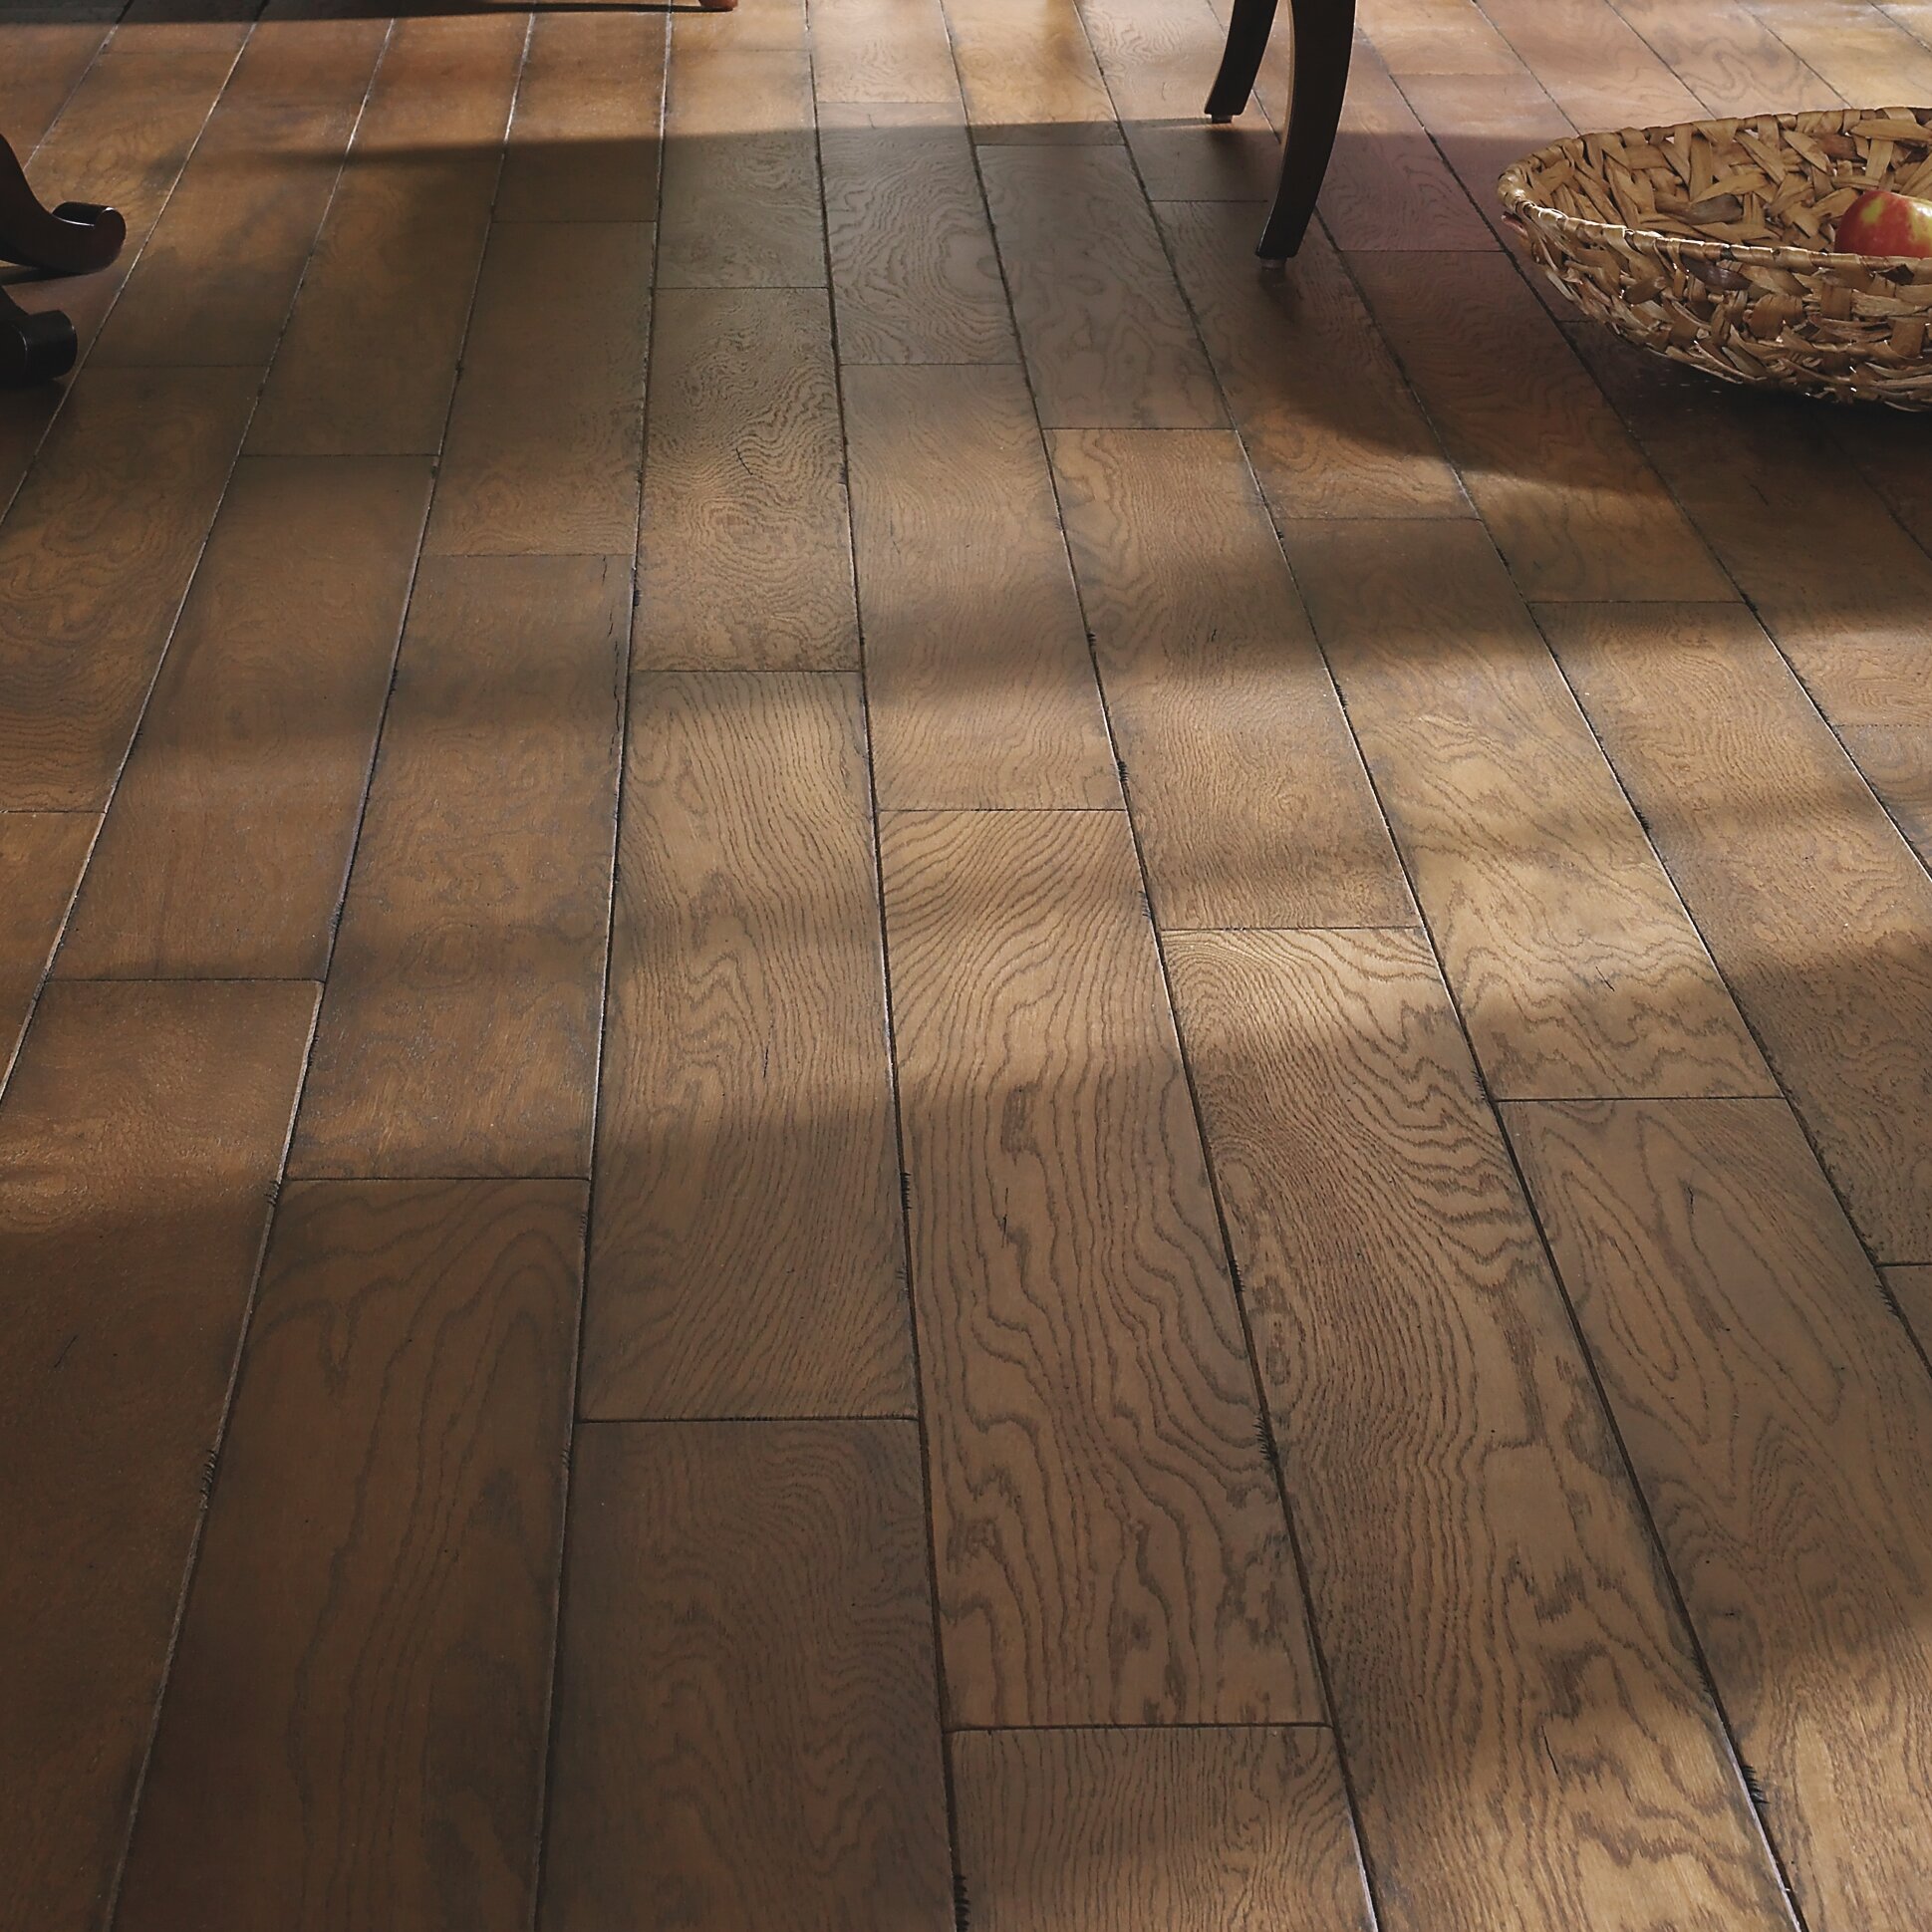 Easoon Usa European Traditions Oak 3 8 Thick X 5 Wide X Varying